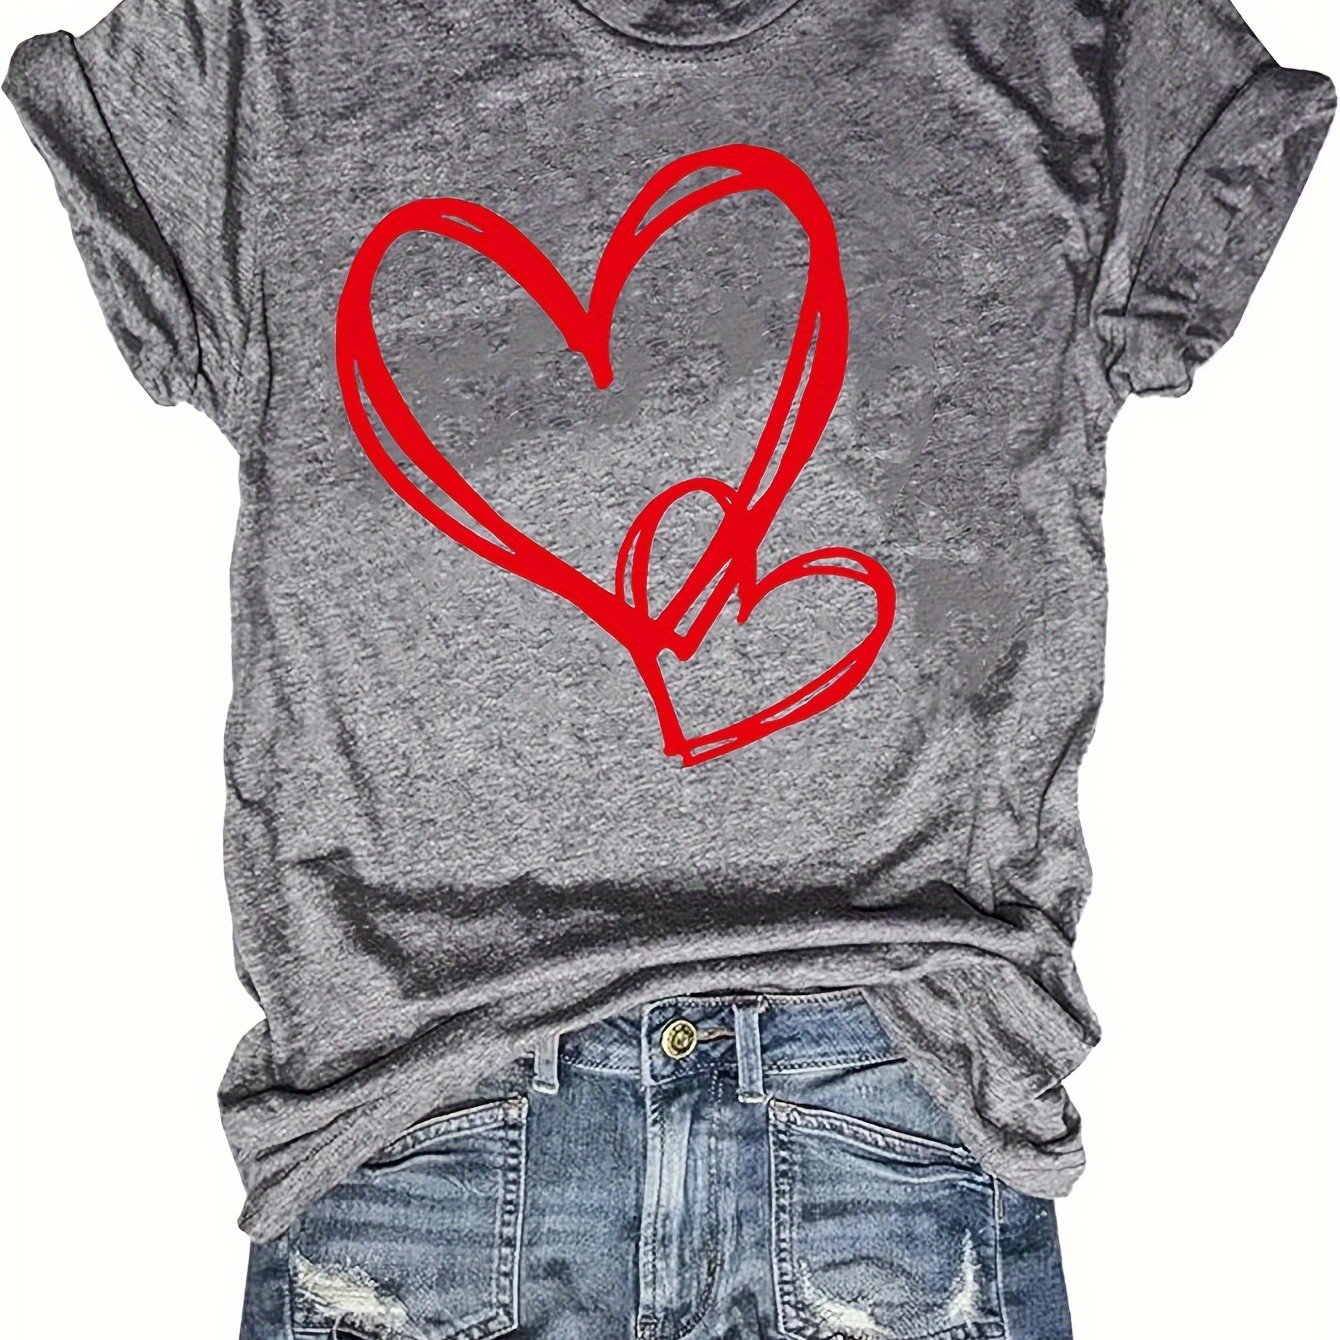 Heart Print Crew Neck T-shirt, Casual Short Sleeve Top For Spring & Fall, Women's Clothing